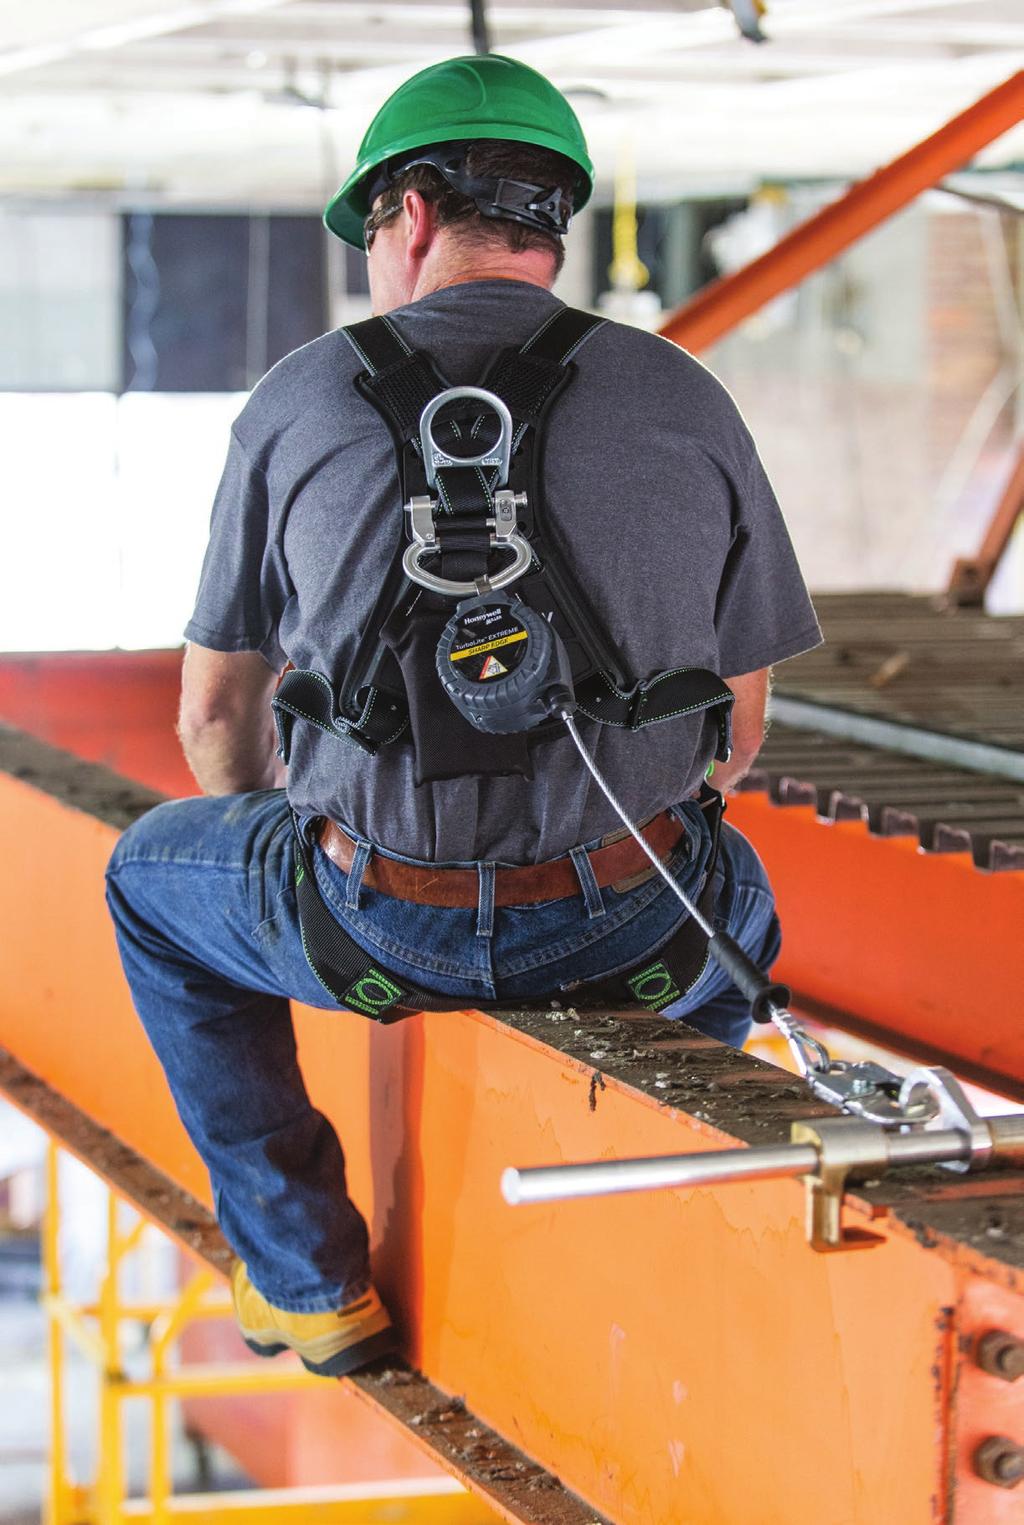 WHAT S INSIDE FALL PROTECTION Fall Protection Experts Since 1945 Miller, a component of Honeywell Industrial Safety, is a world-leading brand in fall protection solutions, including: personal fall